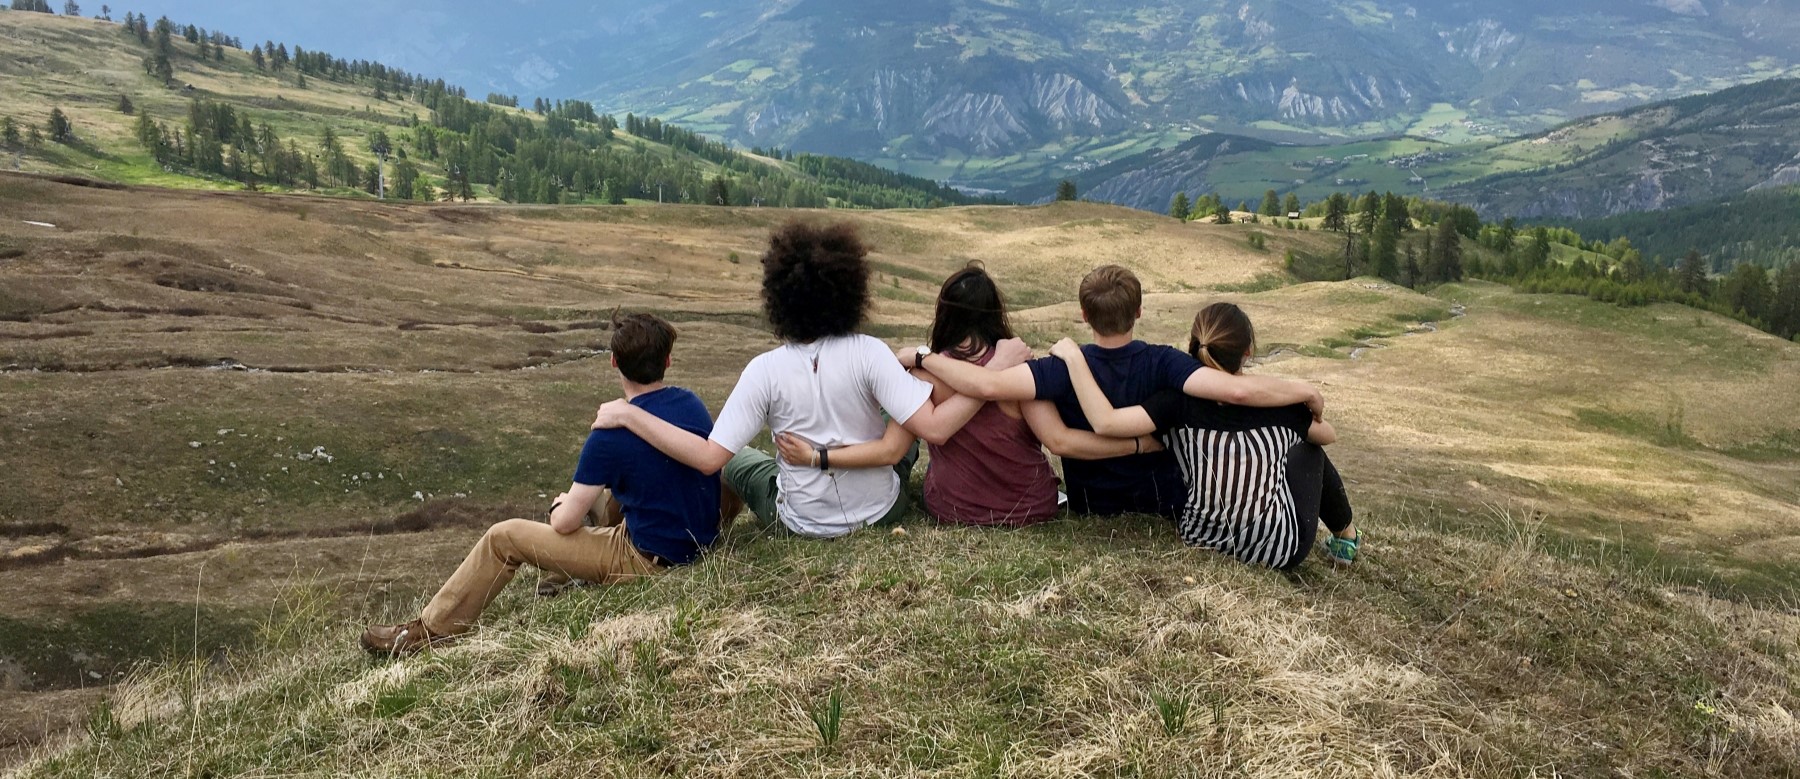 five students link arms and look out at a majestic mountain